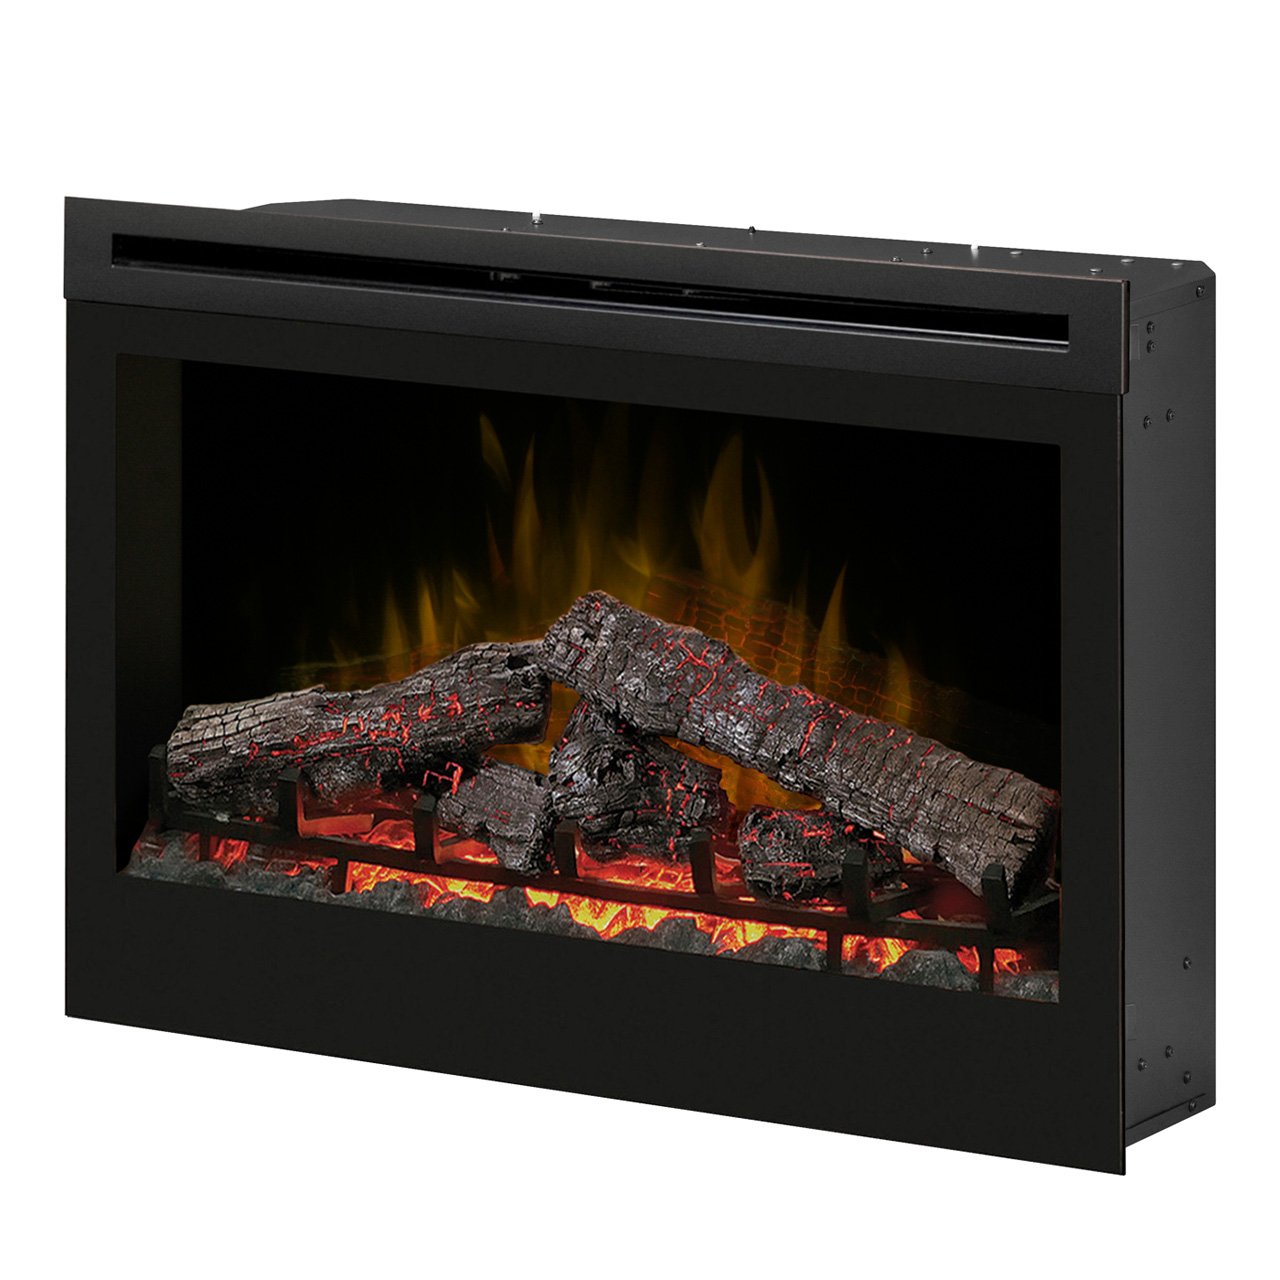 Fireplace Remote Unique Dimplex Df3033st 33 Inch Self Trimming Electric Fireplace Insert